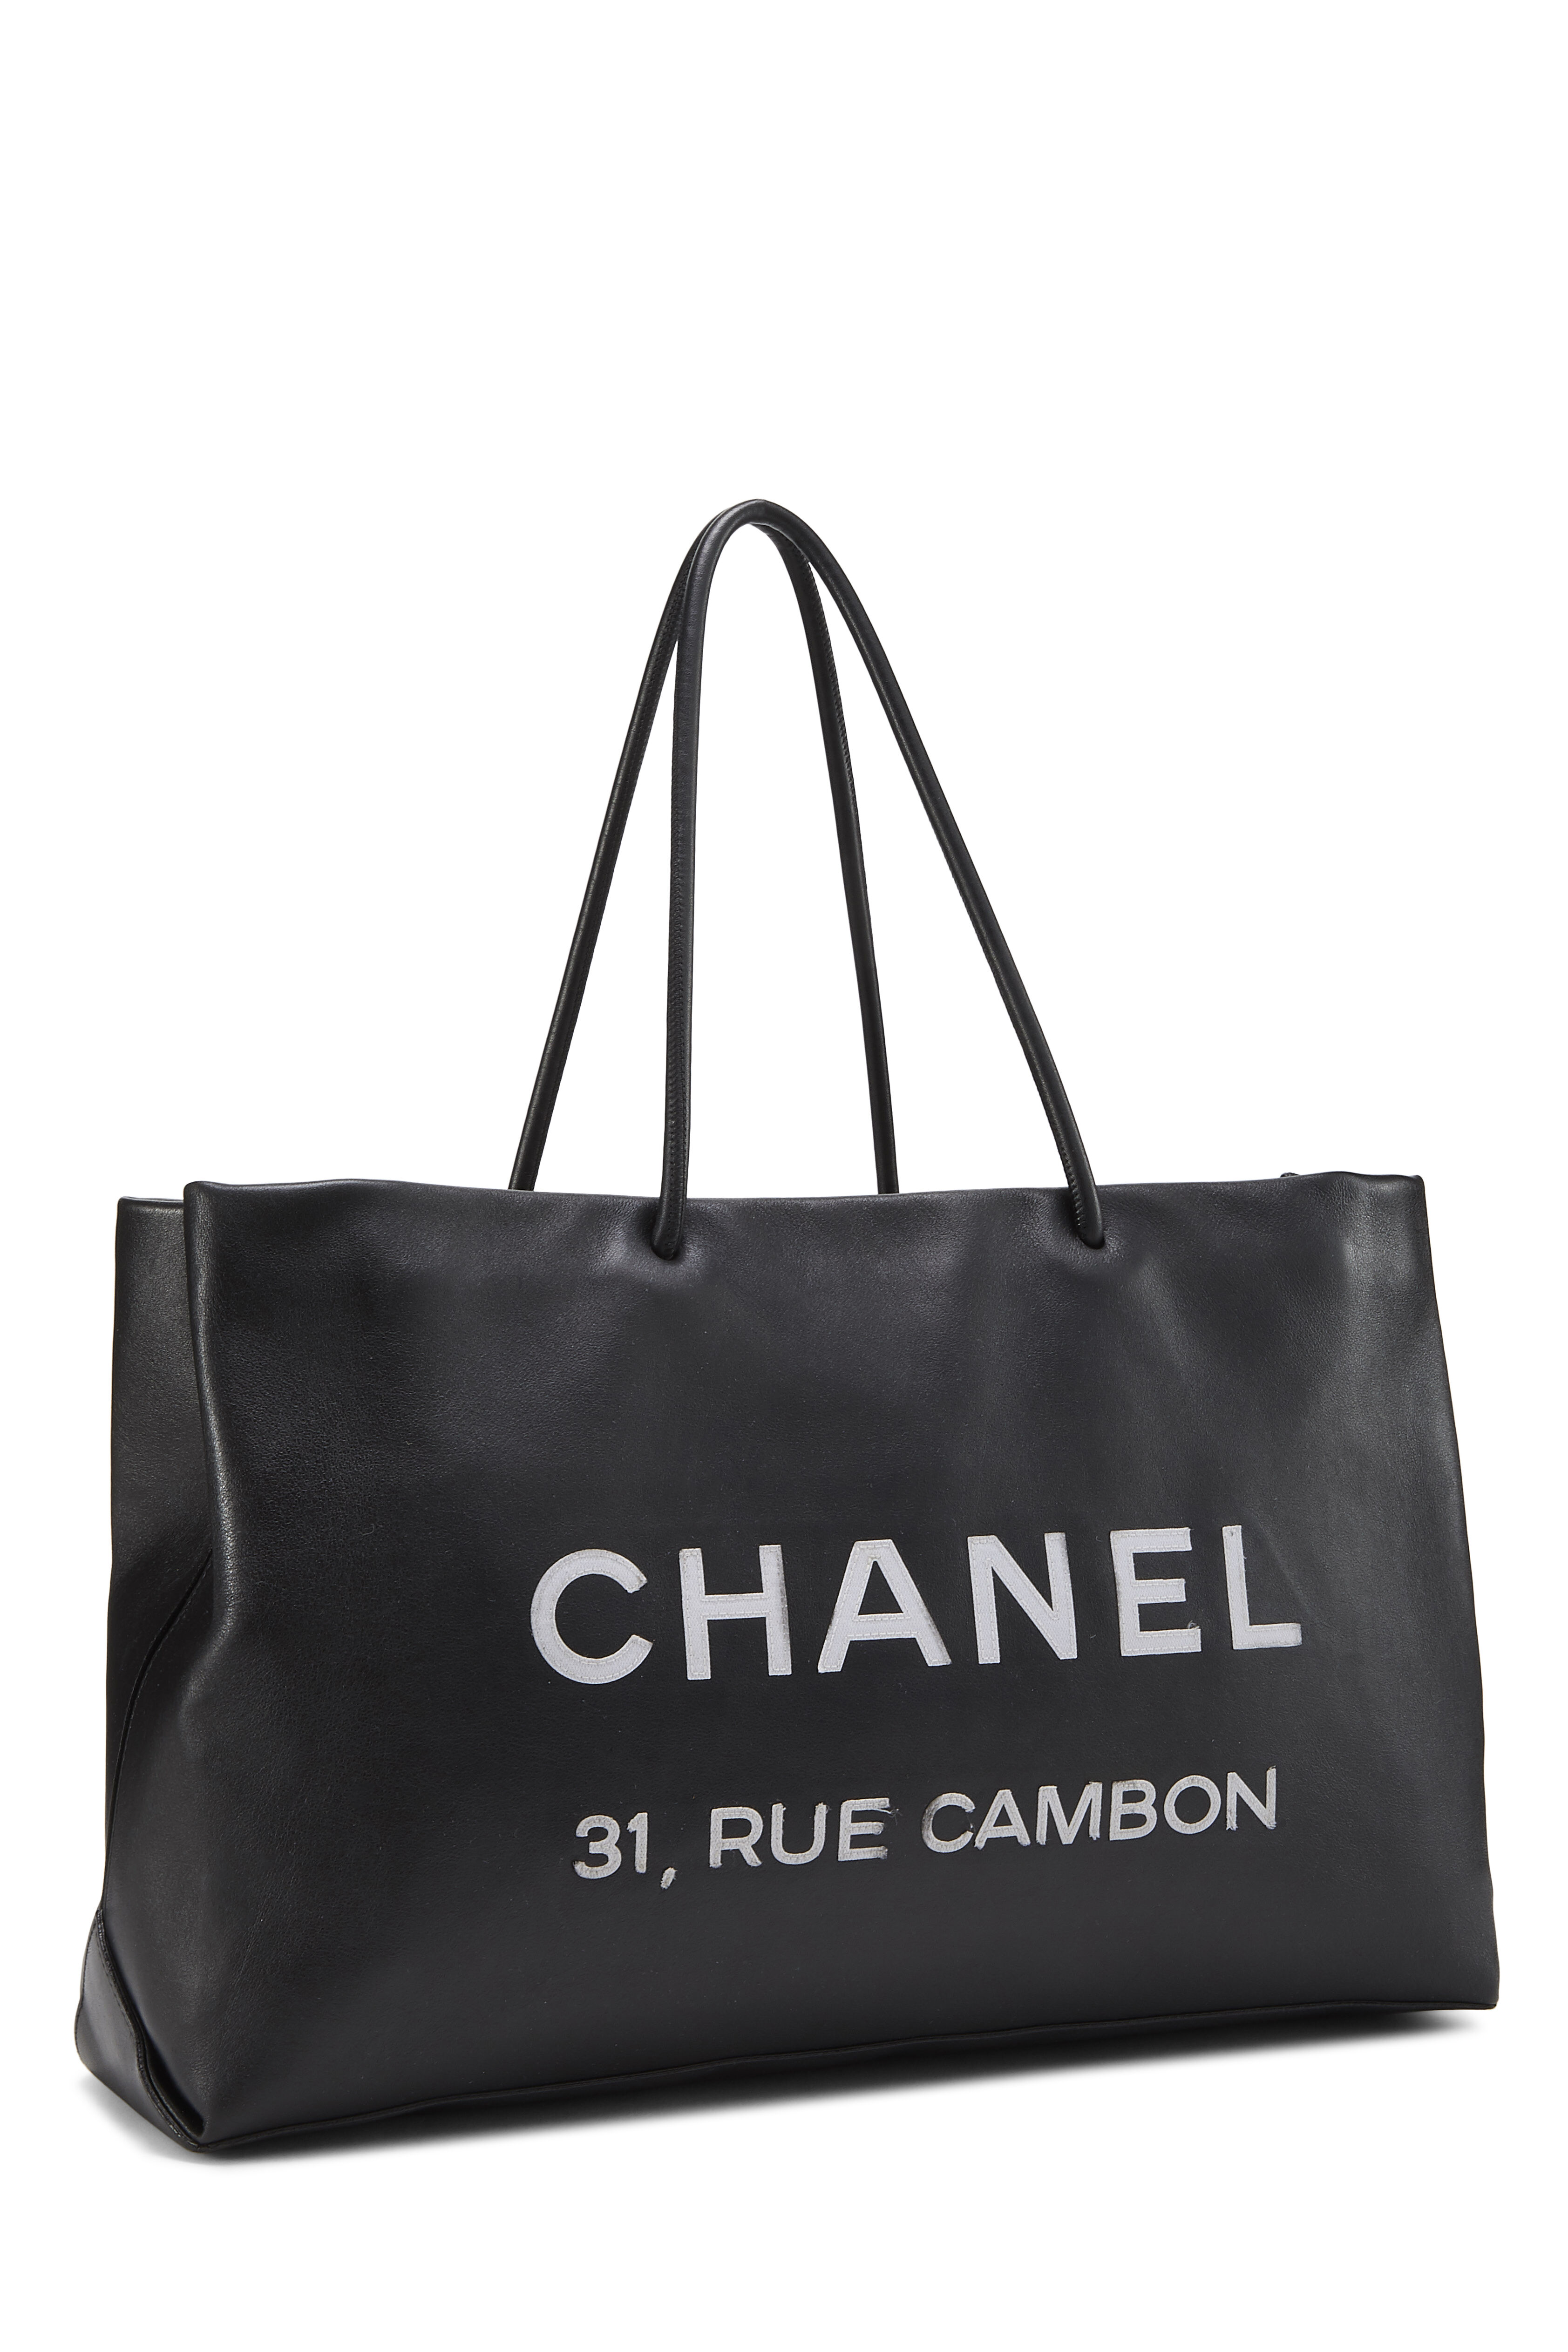 Chanel White Leather Essential Rue Cambon Shopping Tote Small Q6BDII3PWH000